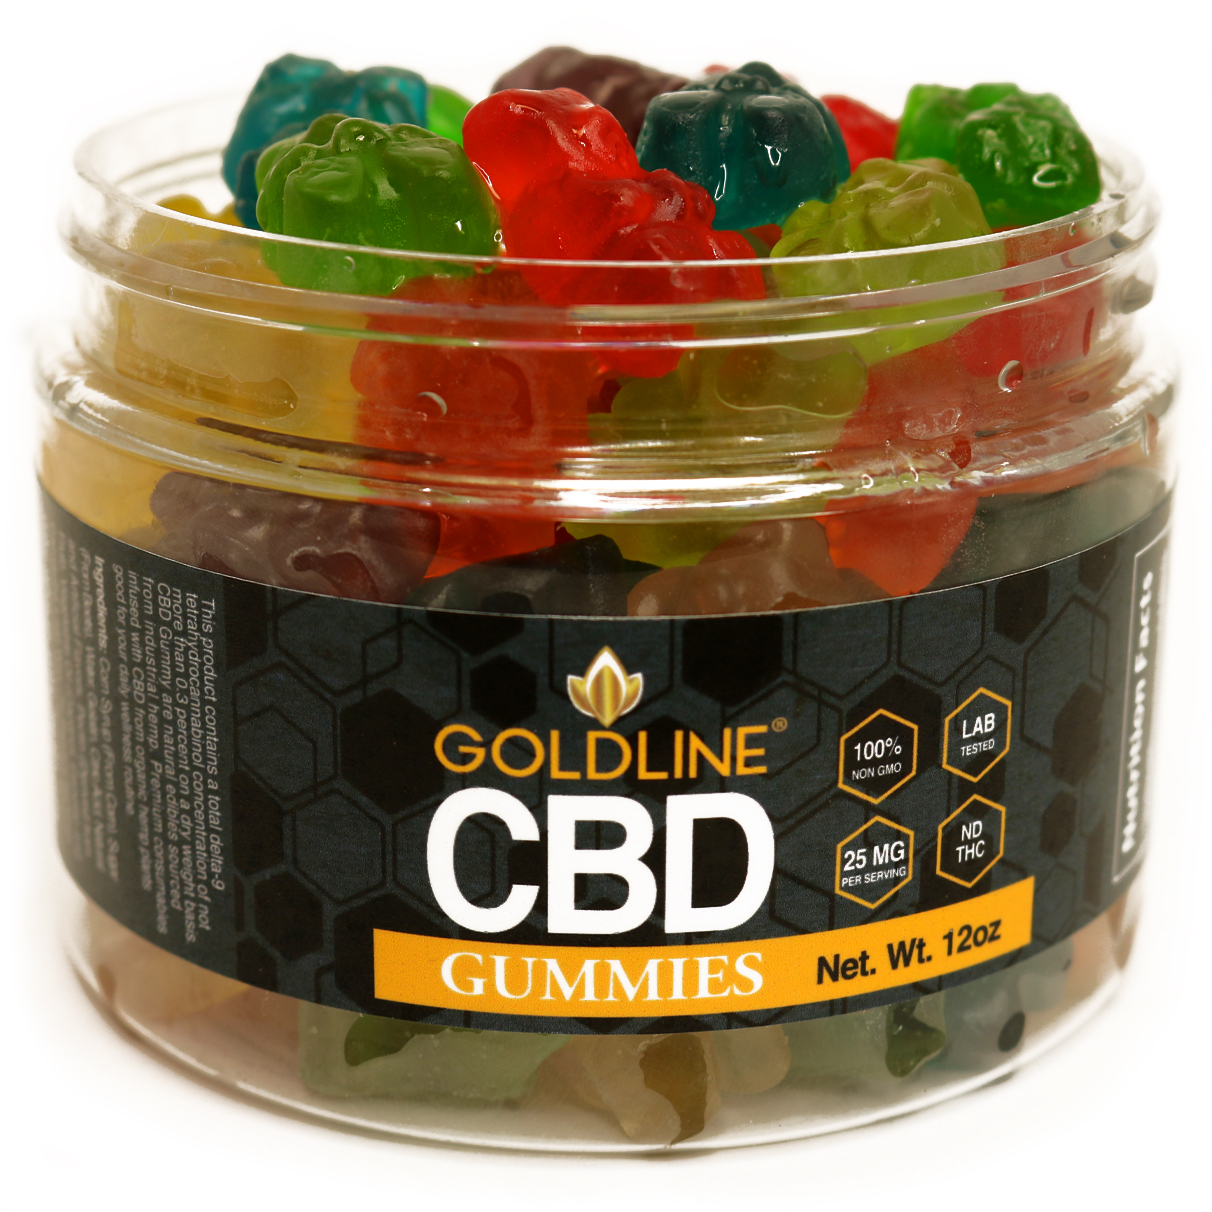 What manufacturers are producing high quality, certified organic Cbd gummy products ?